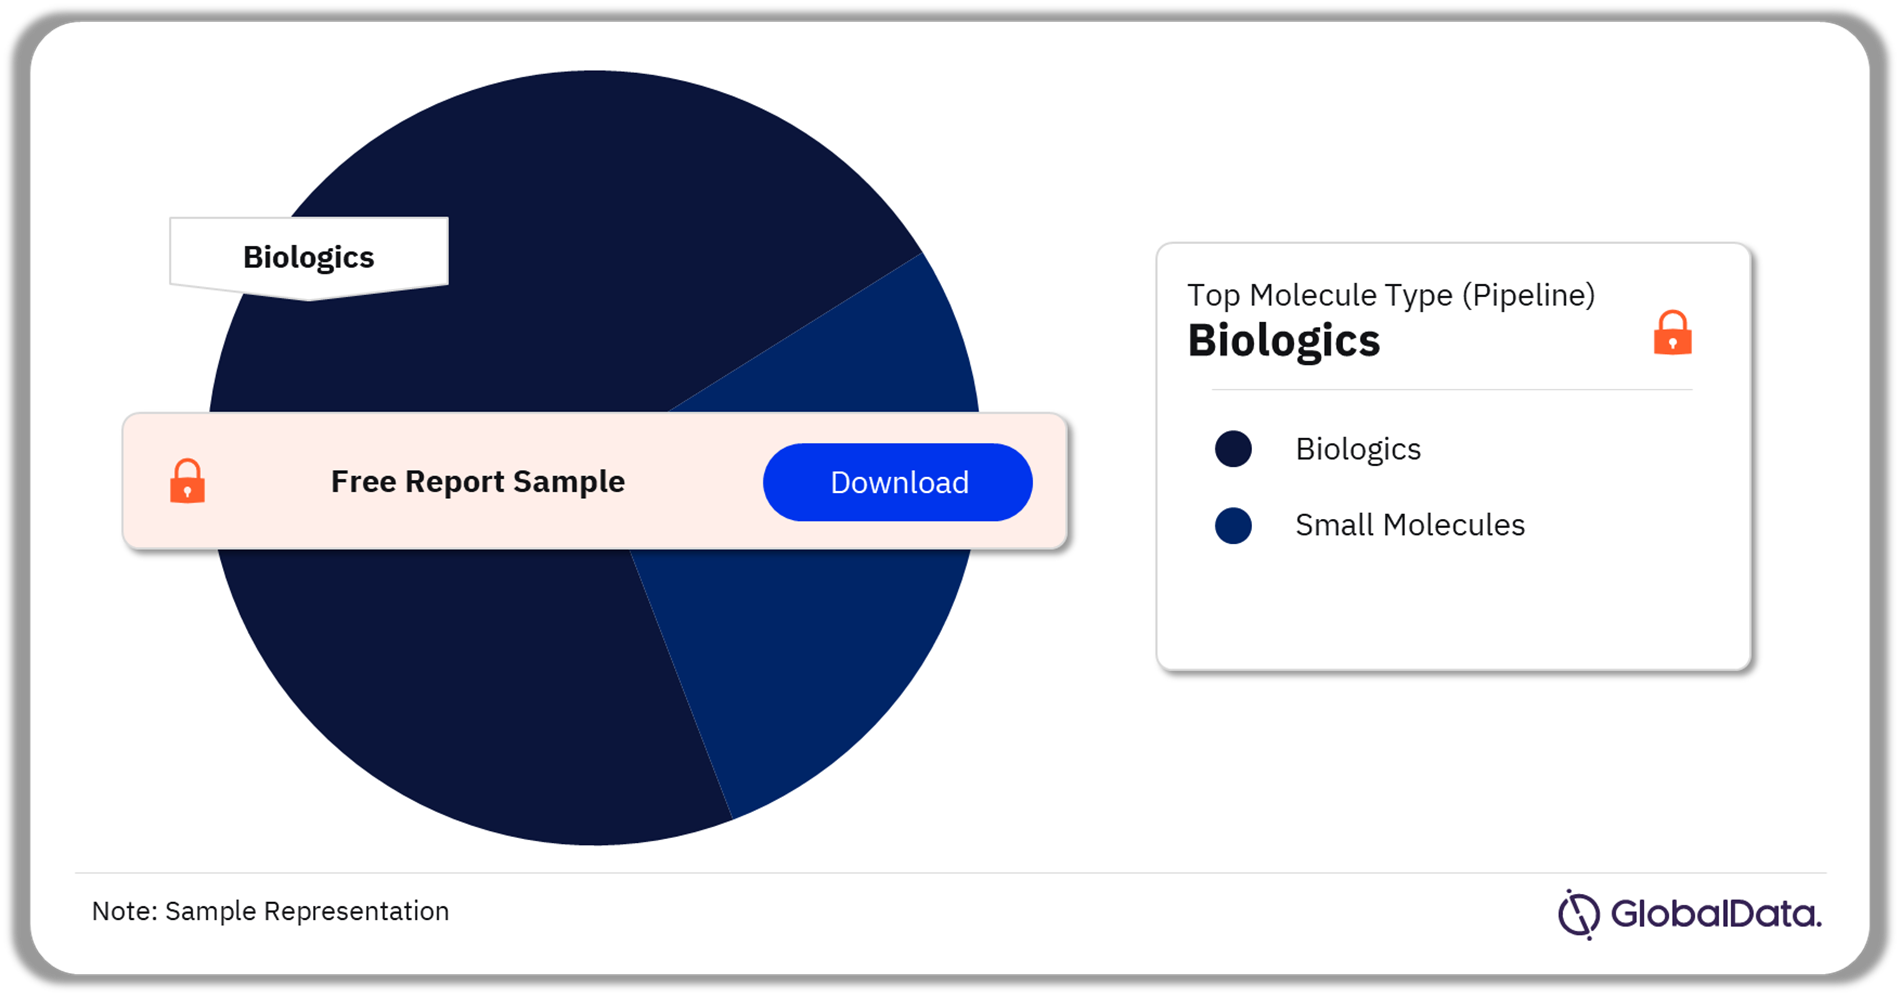 Anal cancer Pipeline Drugs Market Analysis by Molecule Types, 2023 (%)